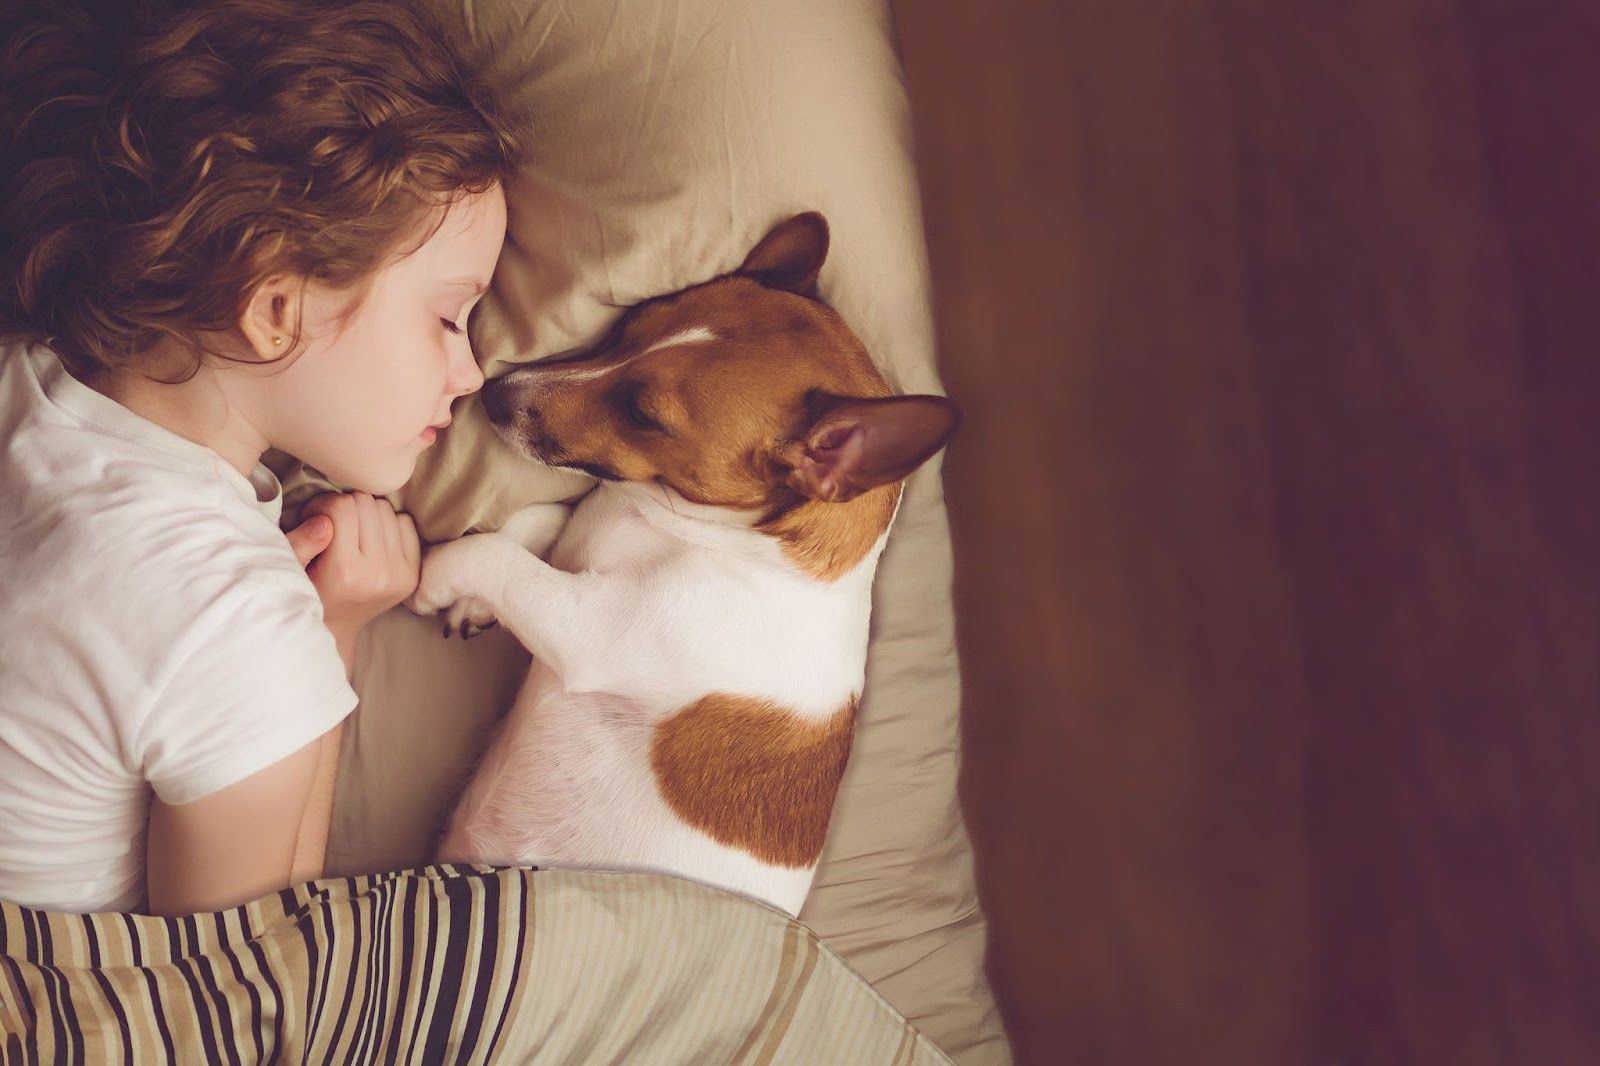 A little girl is sleeping in bed with her dog.